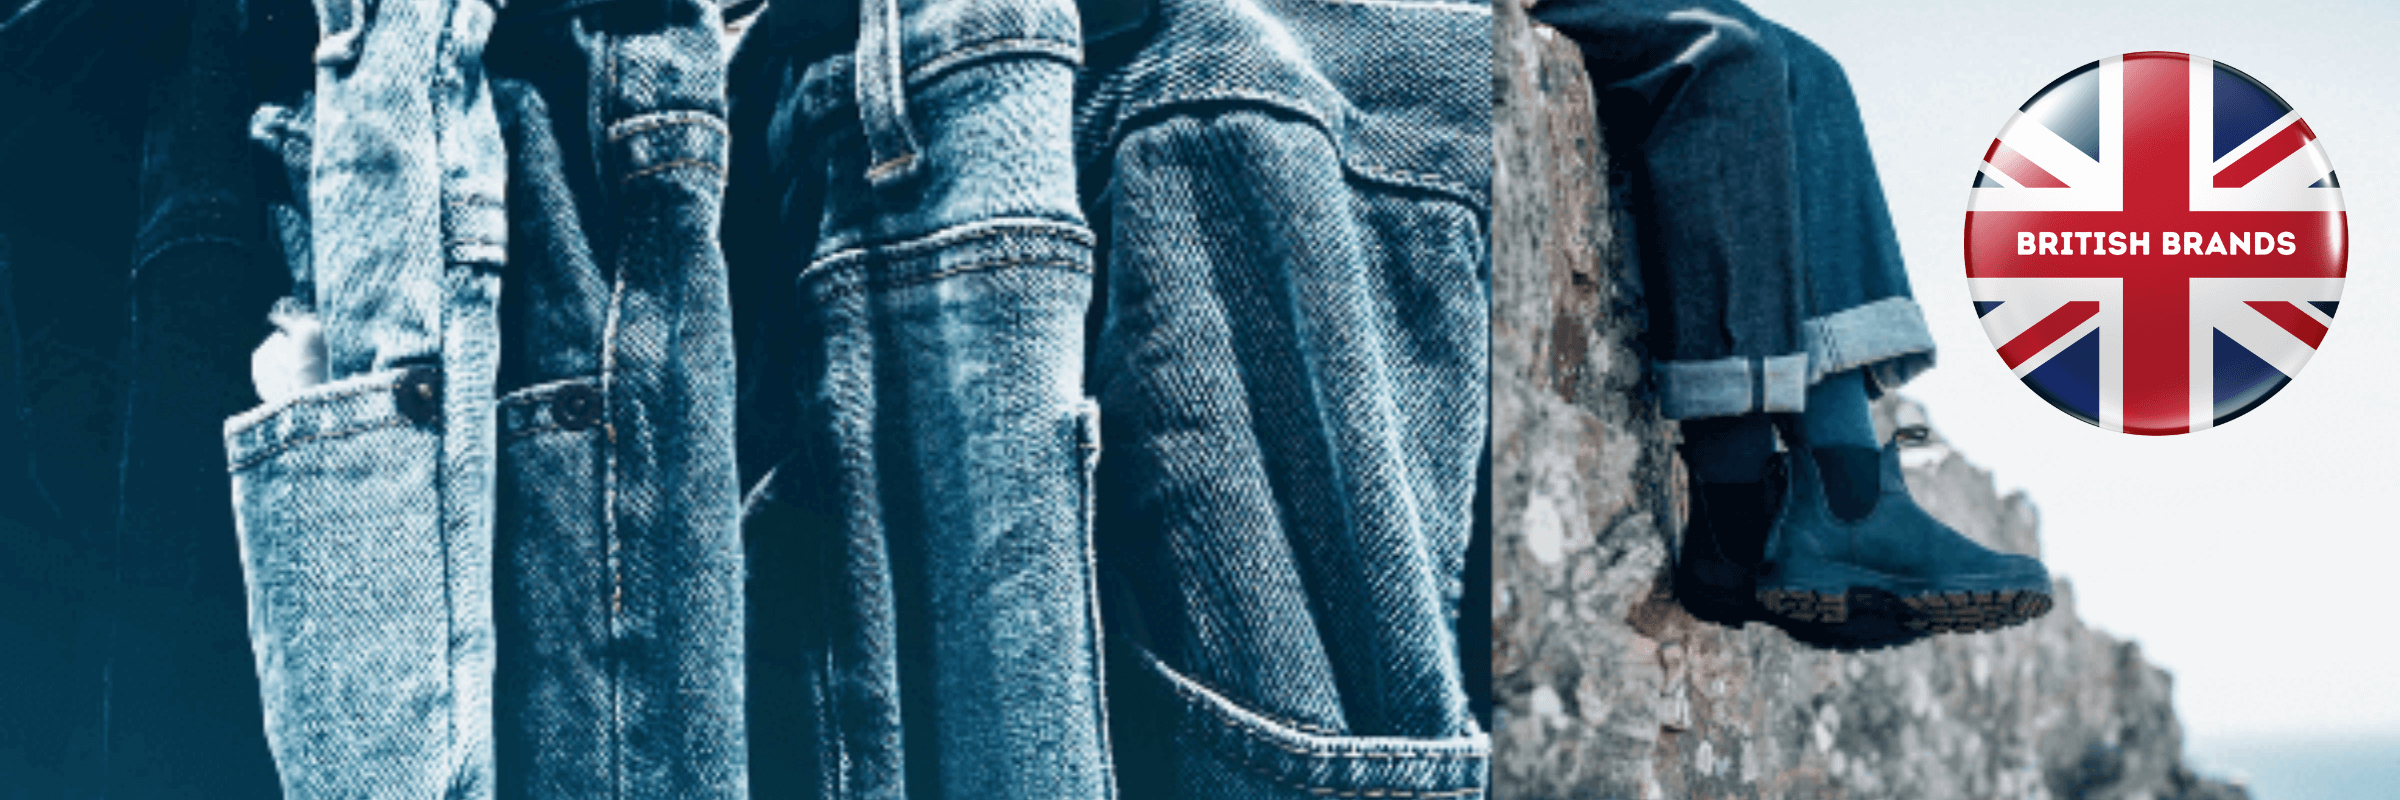 best british jeans brands, made in uk jeans